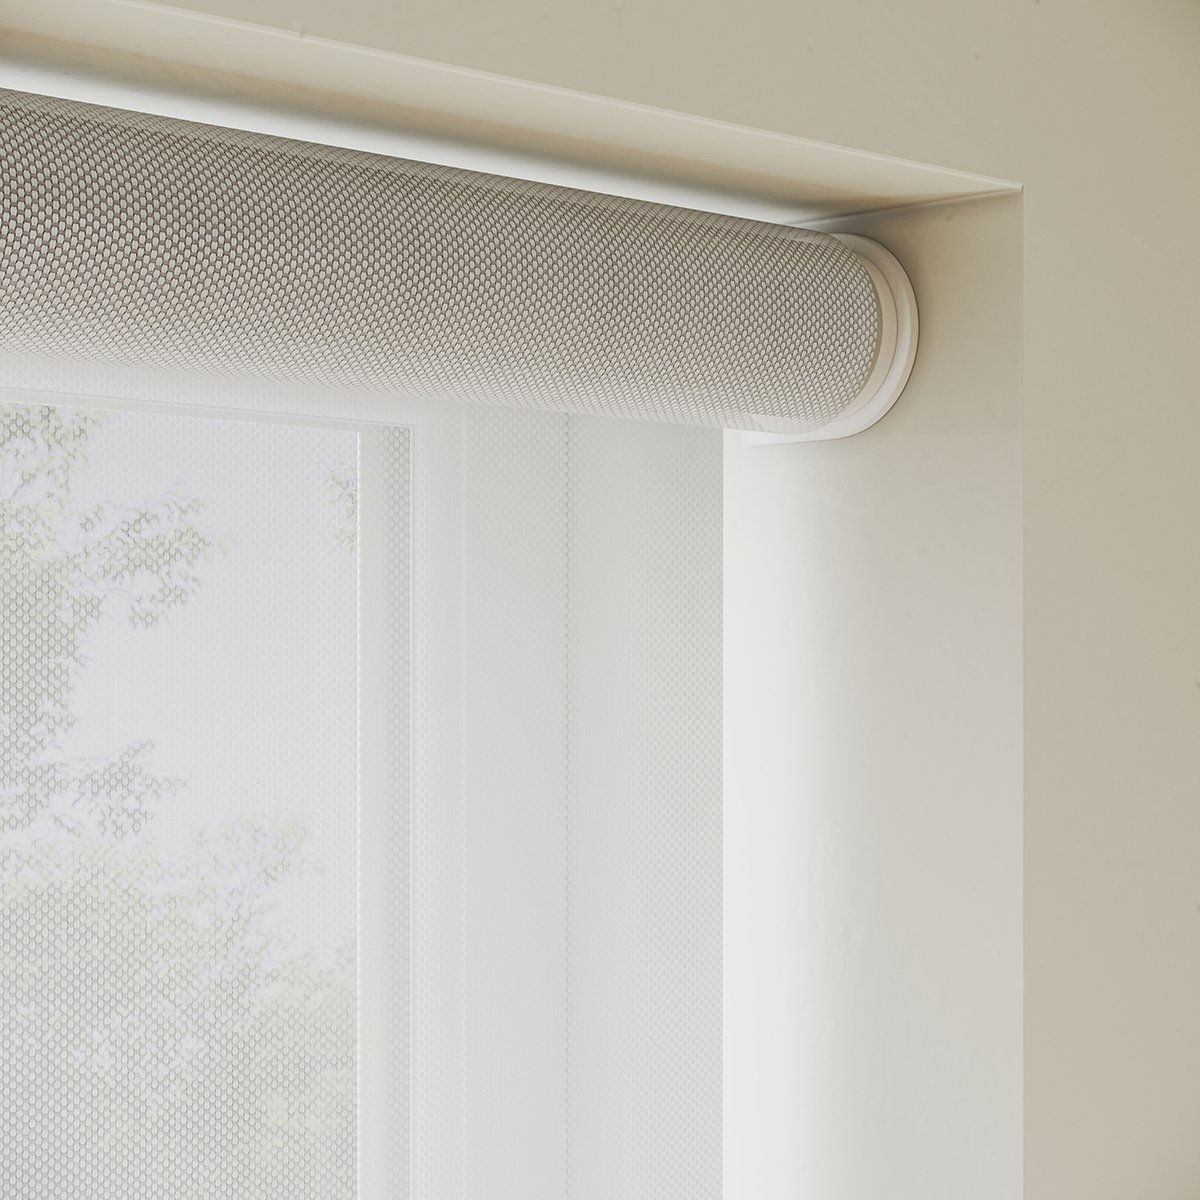 Grey Blinds 3D Rendering: Close-Up